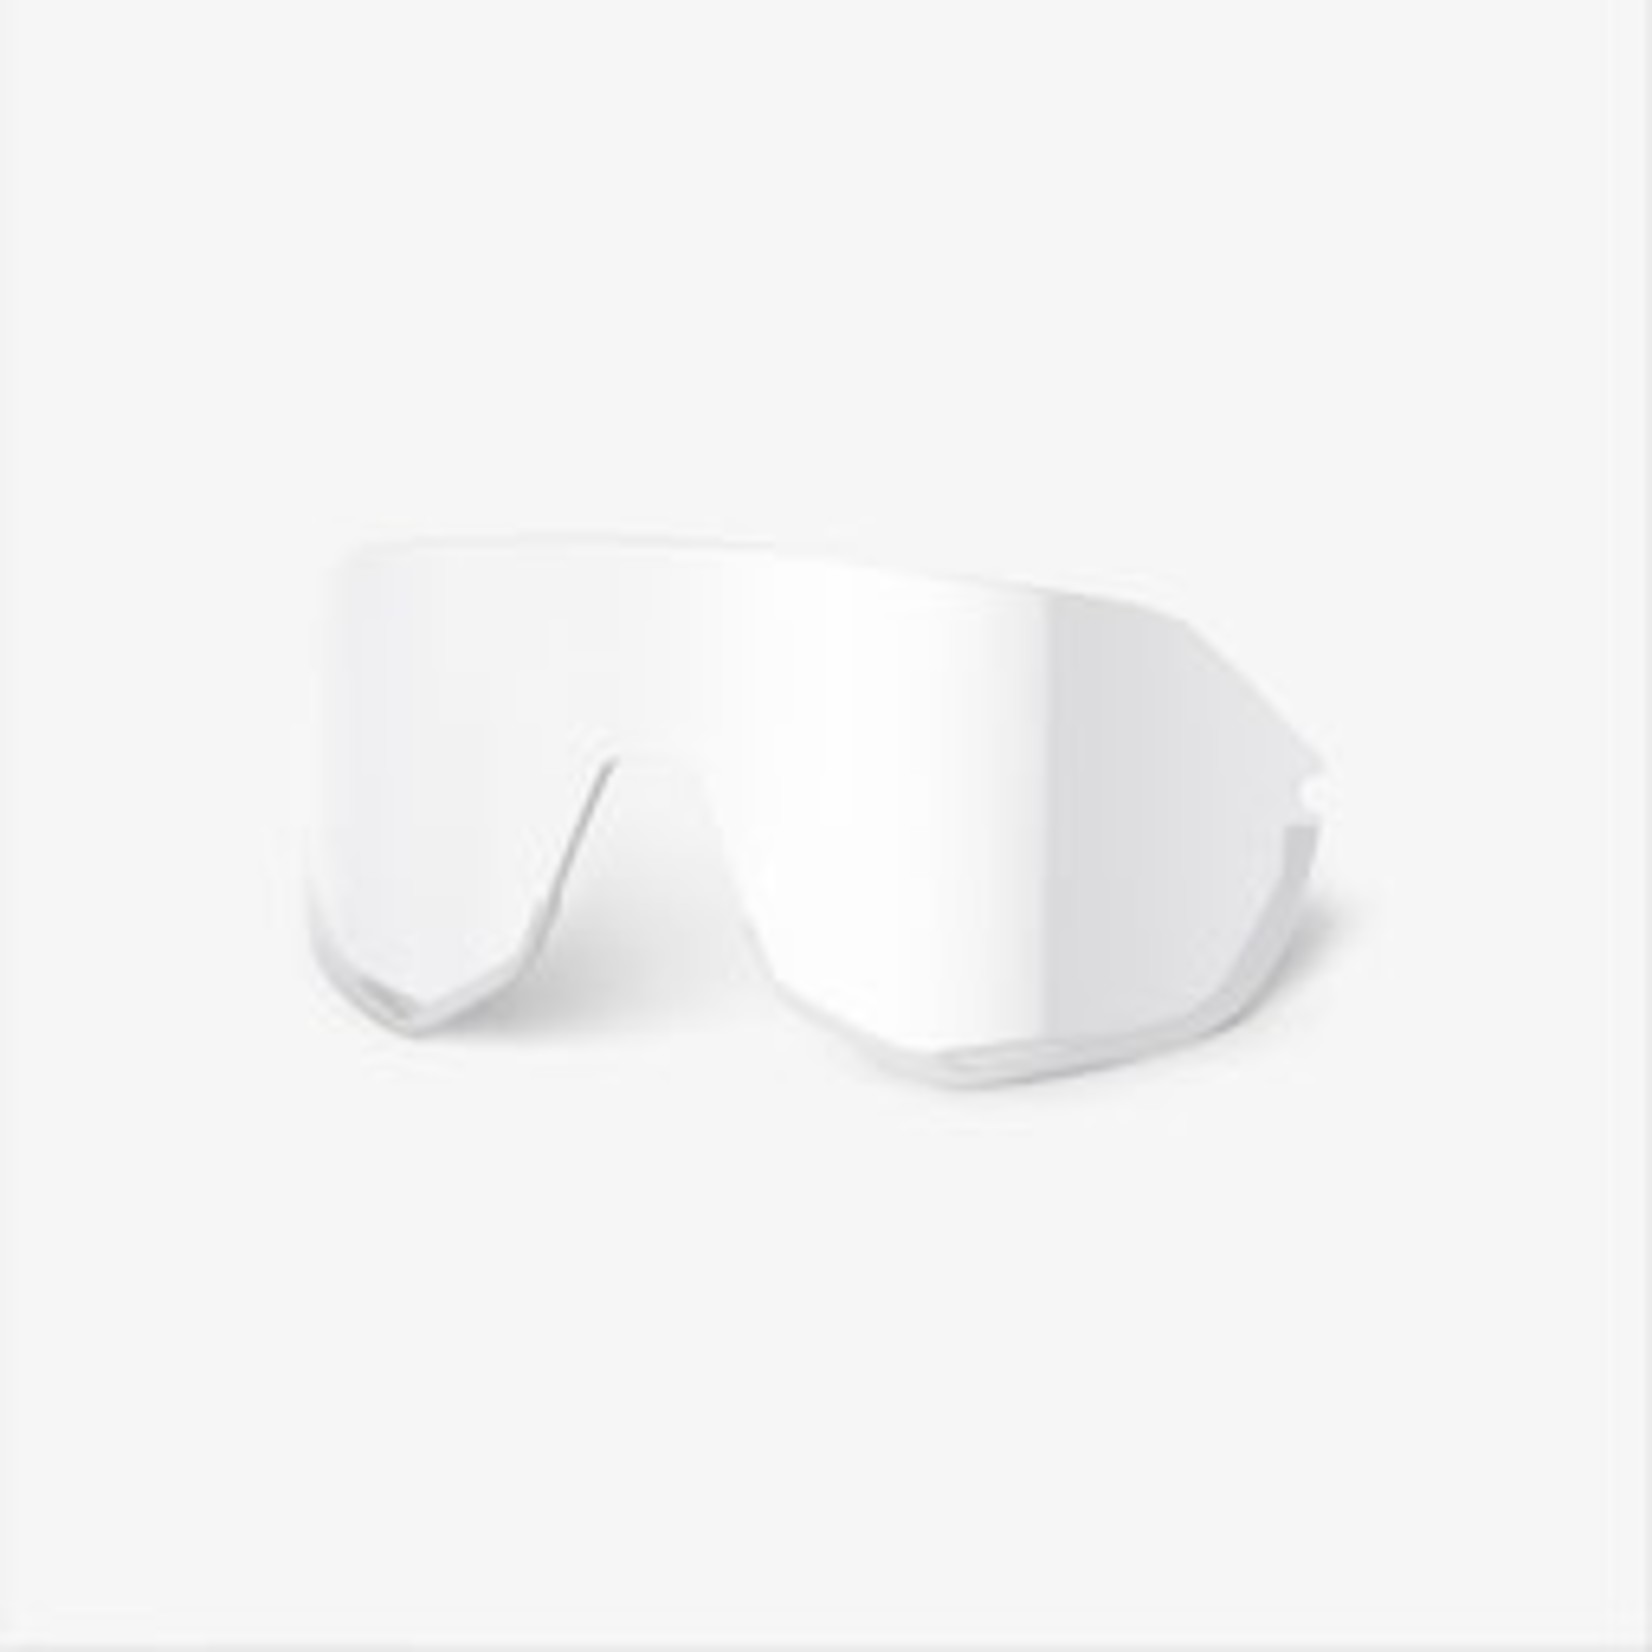 100 Percent 100% S2 Replacement Lens - Clear